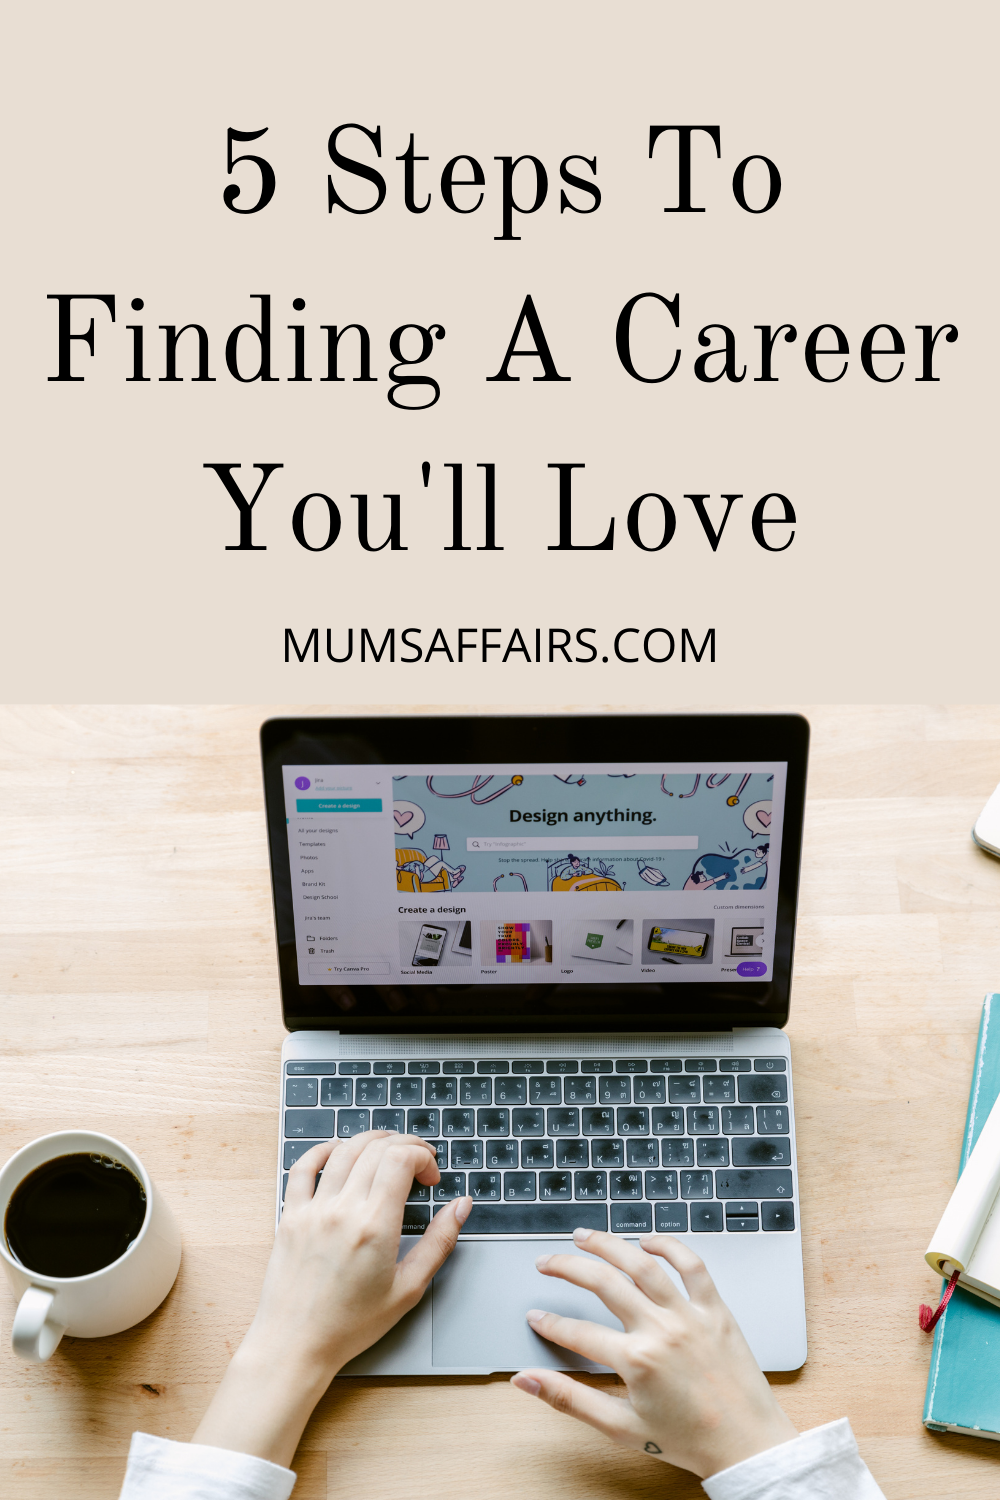 Ways To Finding A Career You'll Love